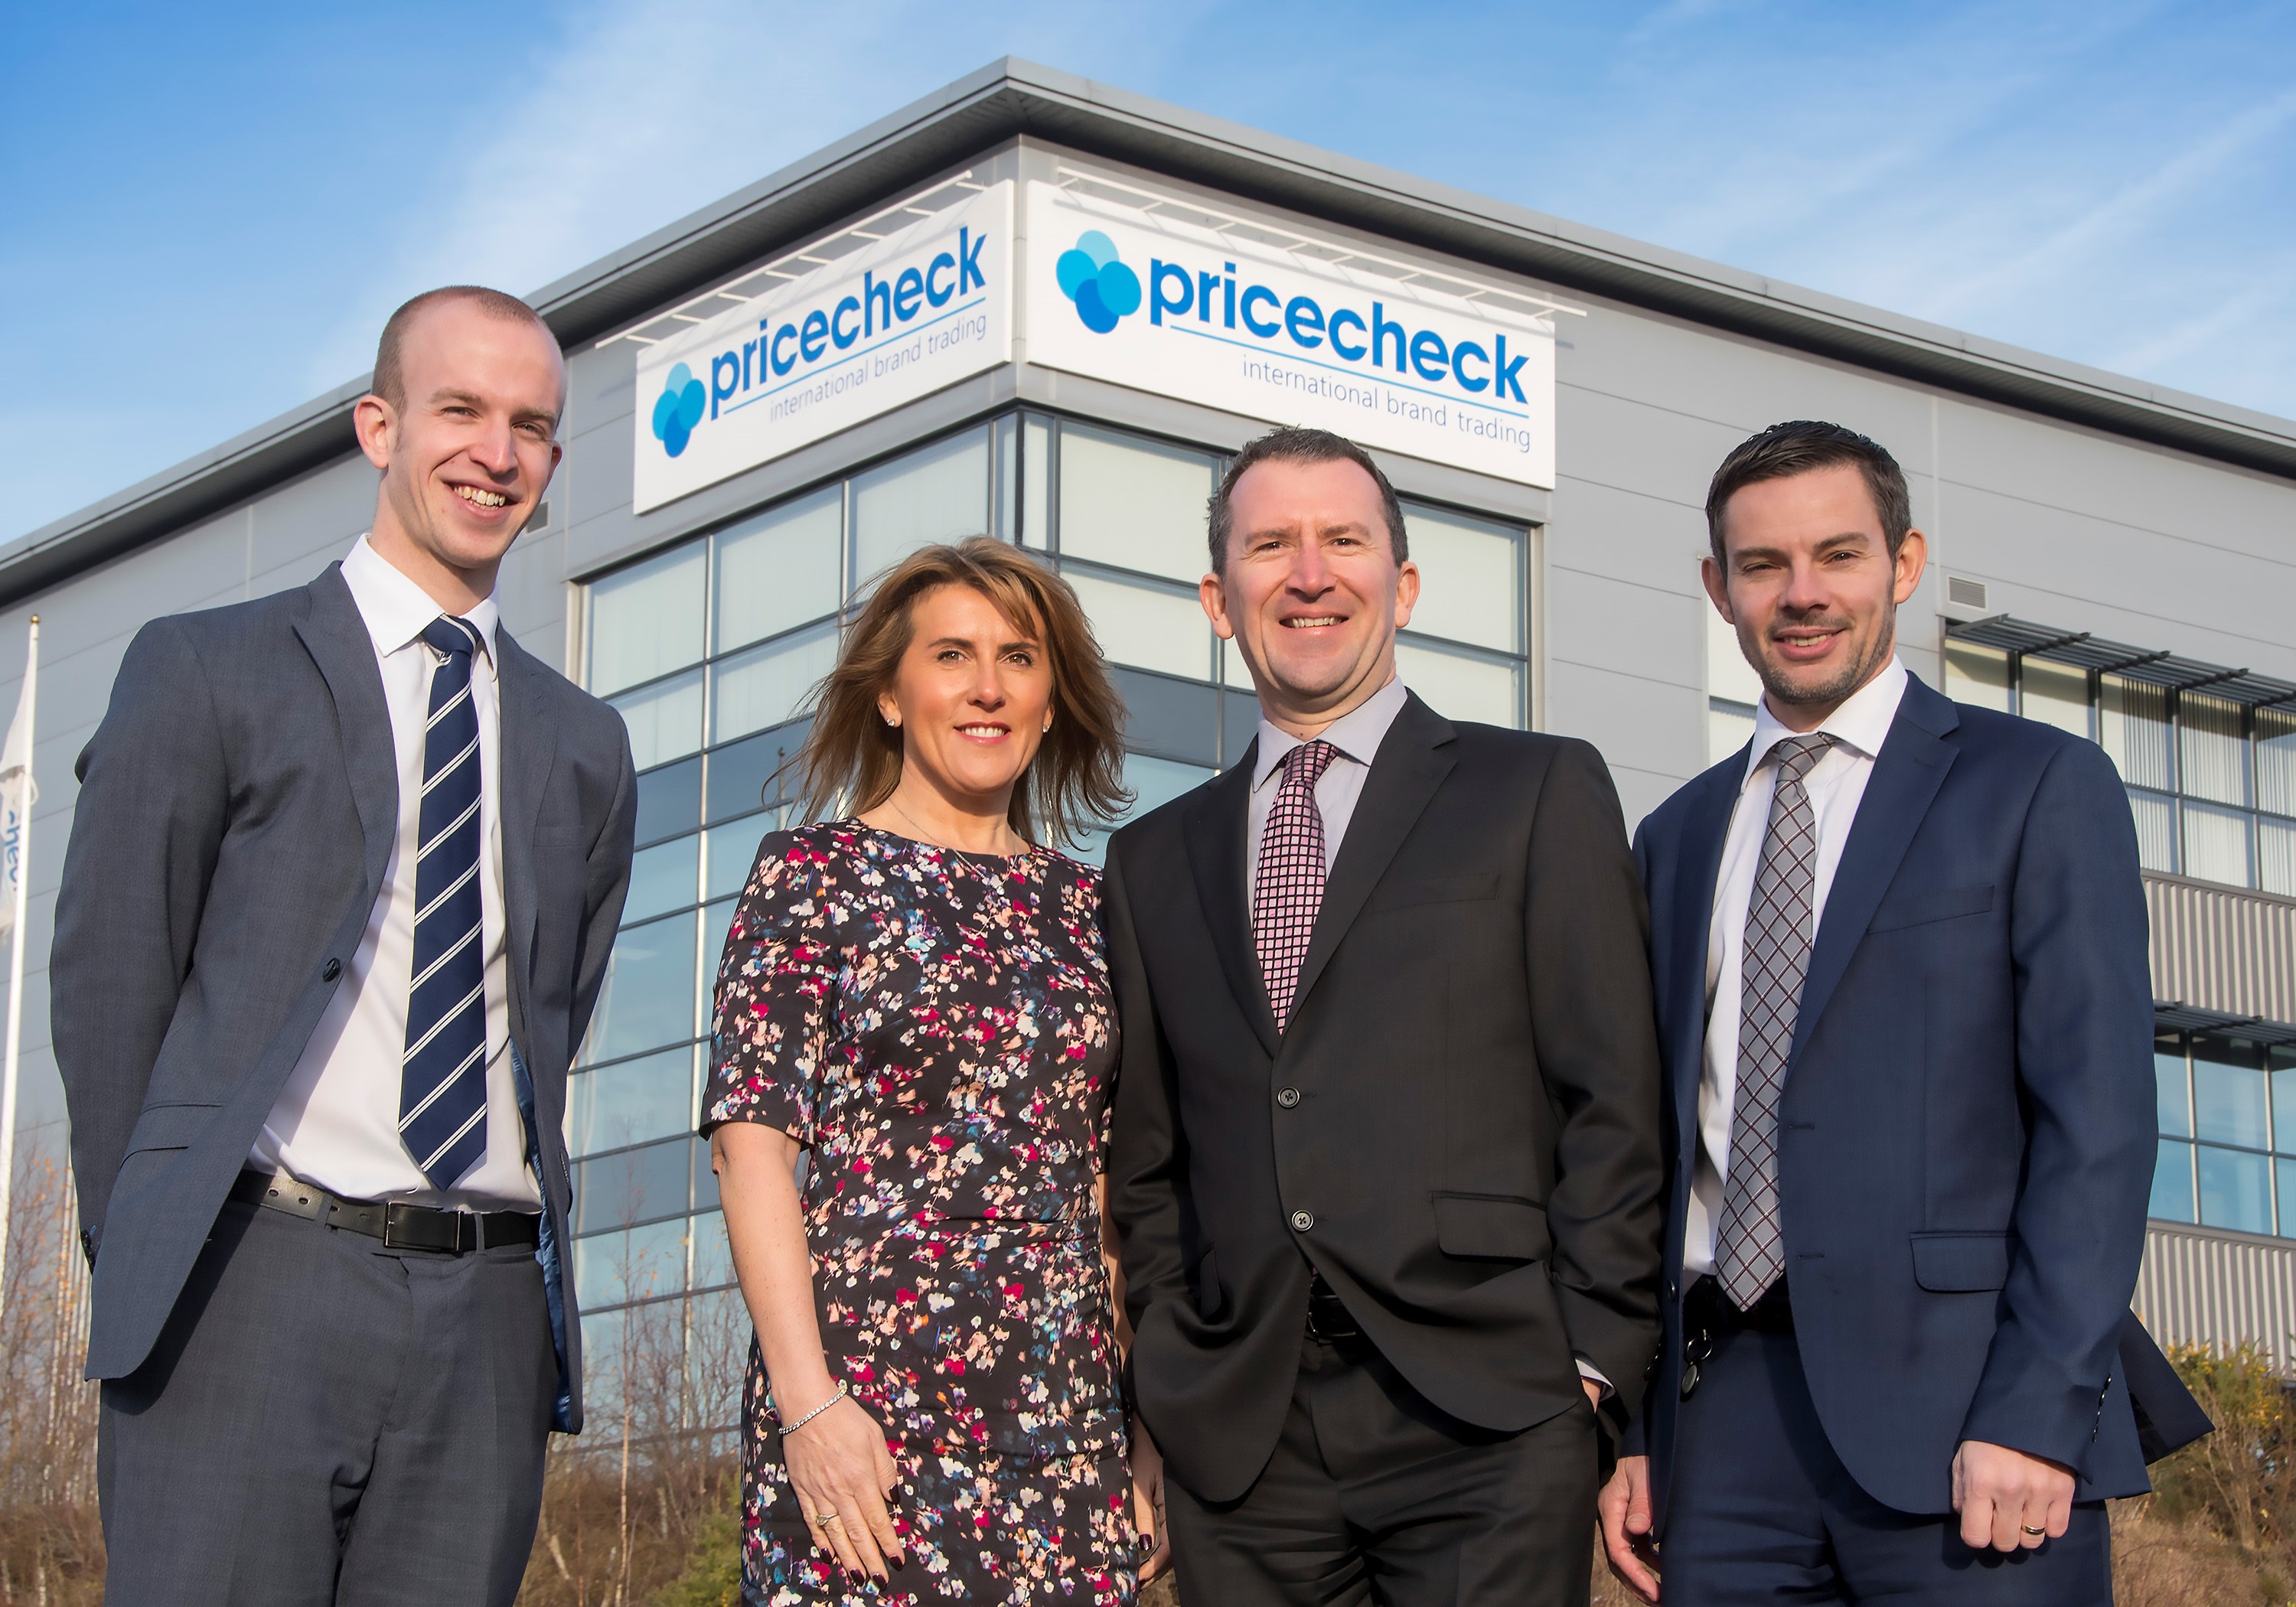 Mark Lythe, joint managing director at Pricecheck; Lee Walker, finance director at Pricecheck; Mark Butterworth, relationship director at Lloyds Bank; Debbie Harrison, joint managing director at Pricecheck